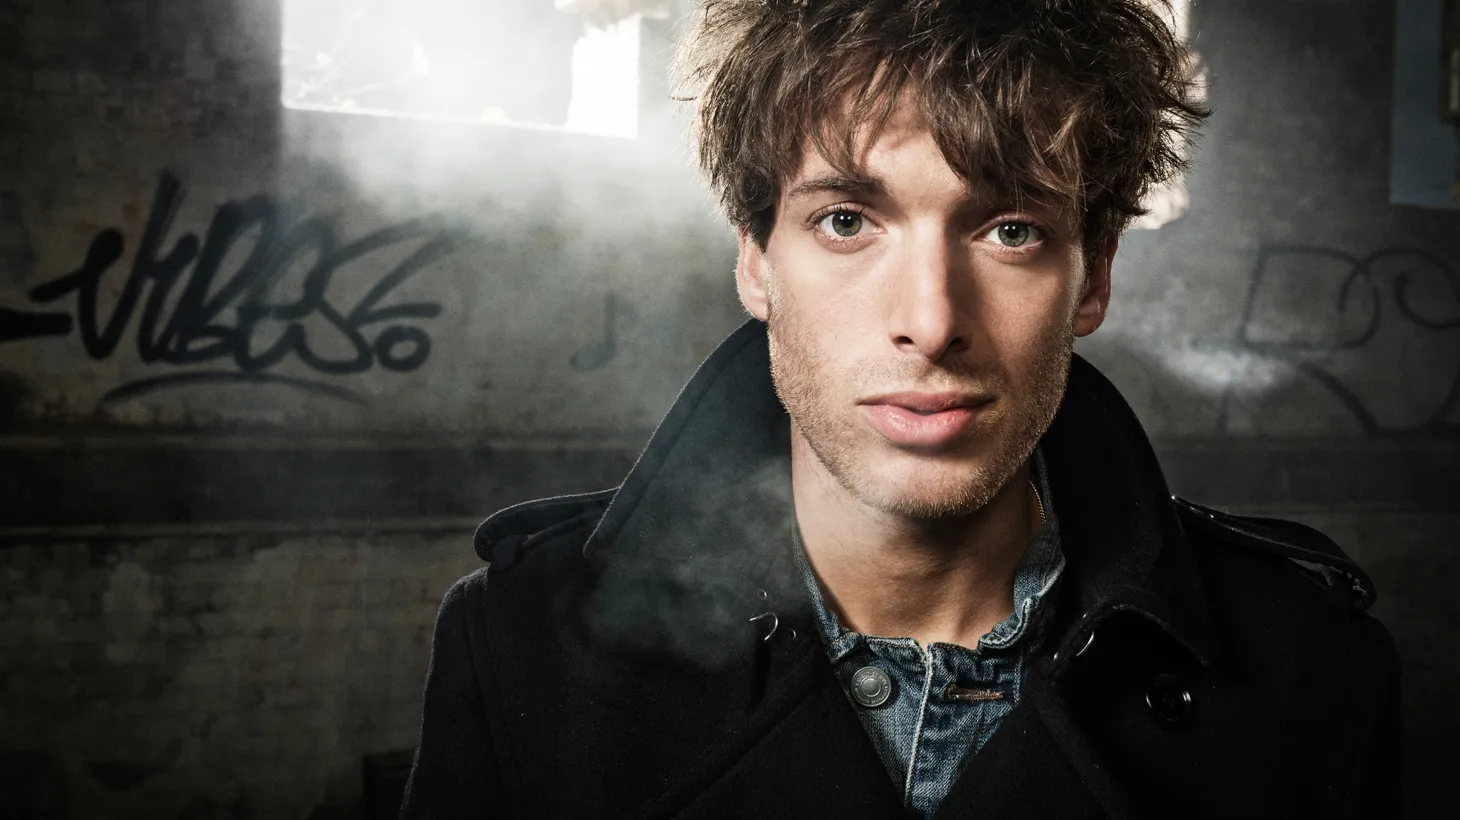 Scottish singer/songwriter Paolo Nutini is a household name across the pond. His excellent third album is a diverse collection of songs, including some bittersweet ballads. We’ll hear it live on Morning Becomes Eclectic.